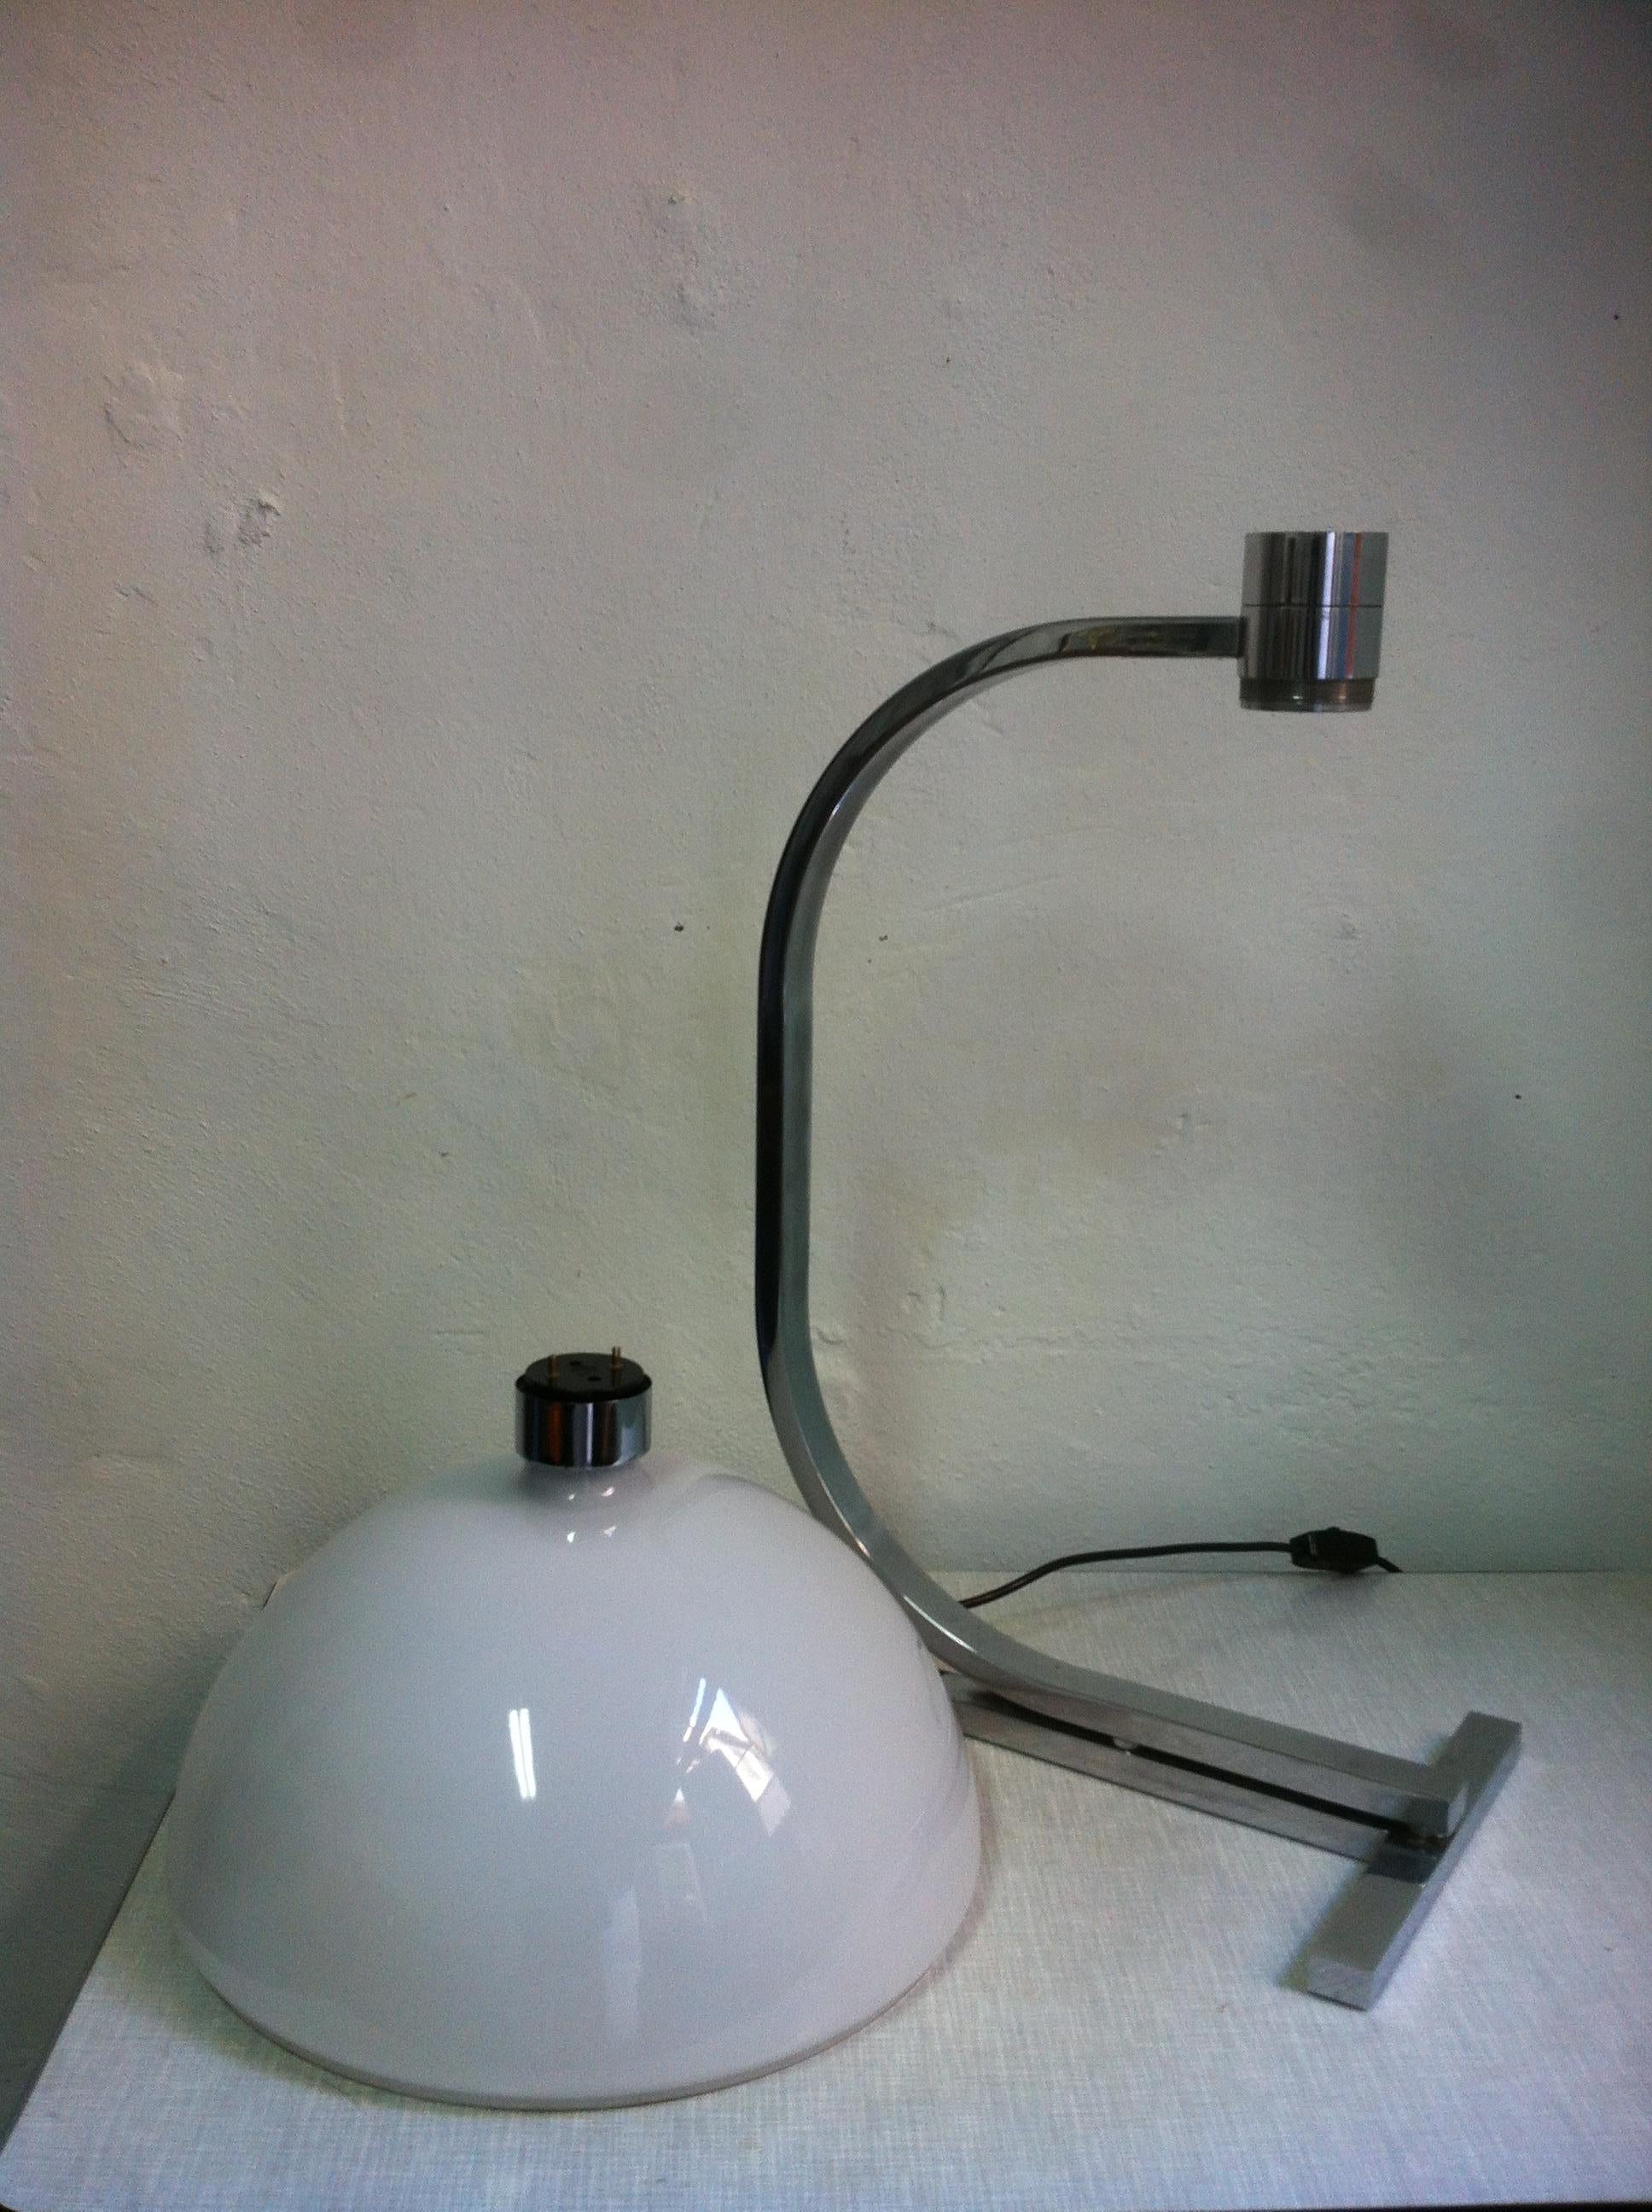 Midcentury AM/AS Table Lamp by Helg, Piva, and Albini for Sirrah Large, 1969 For Sale 4